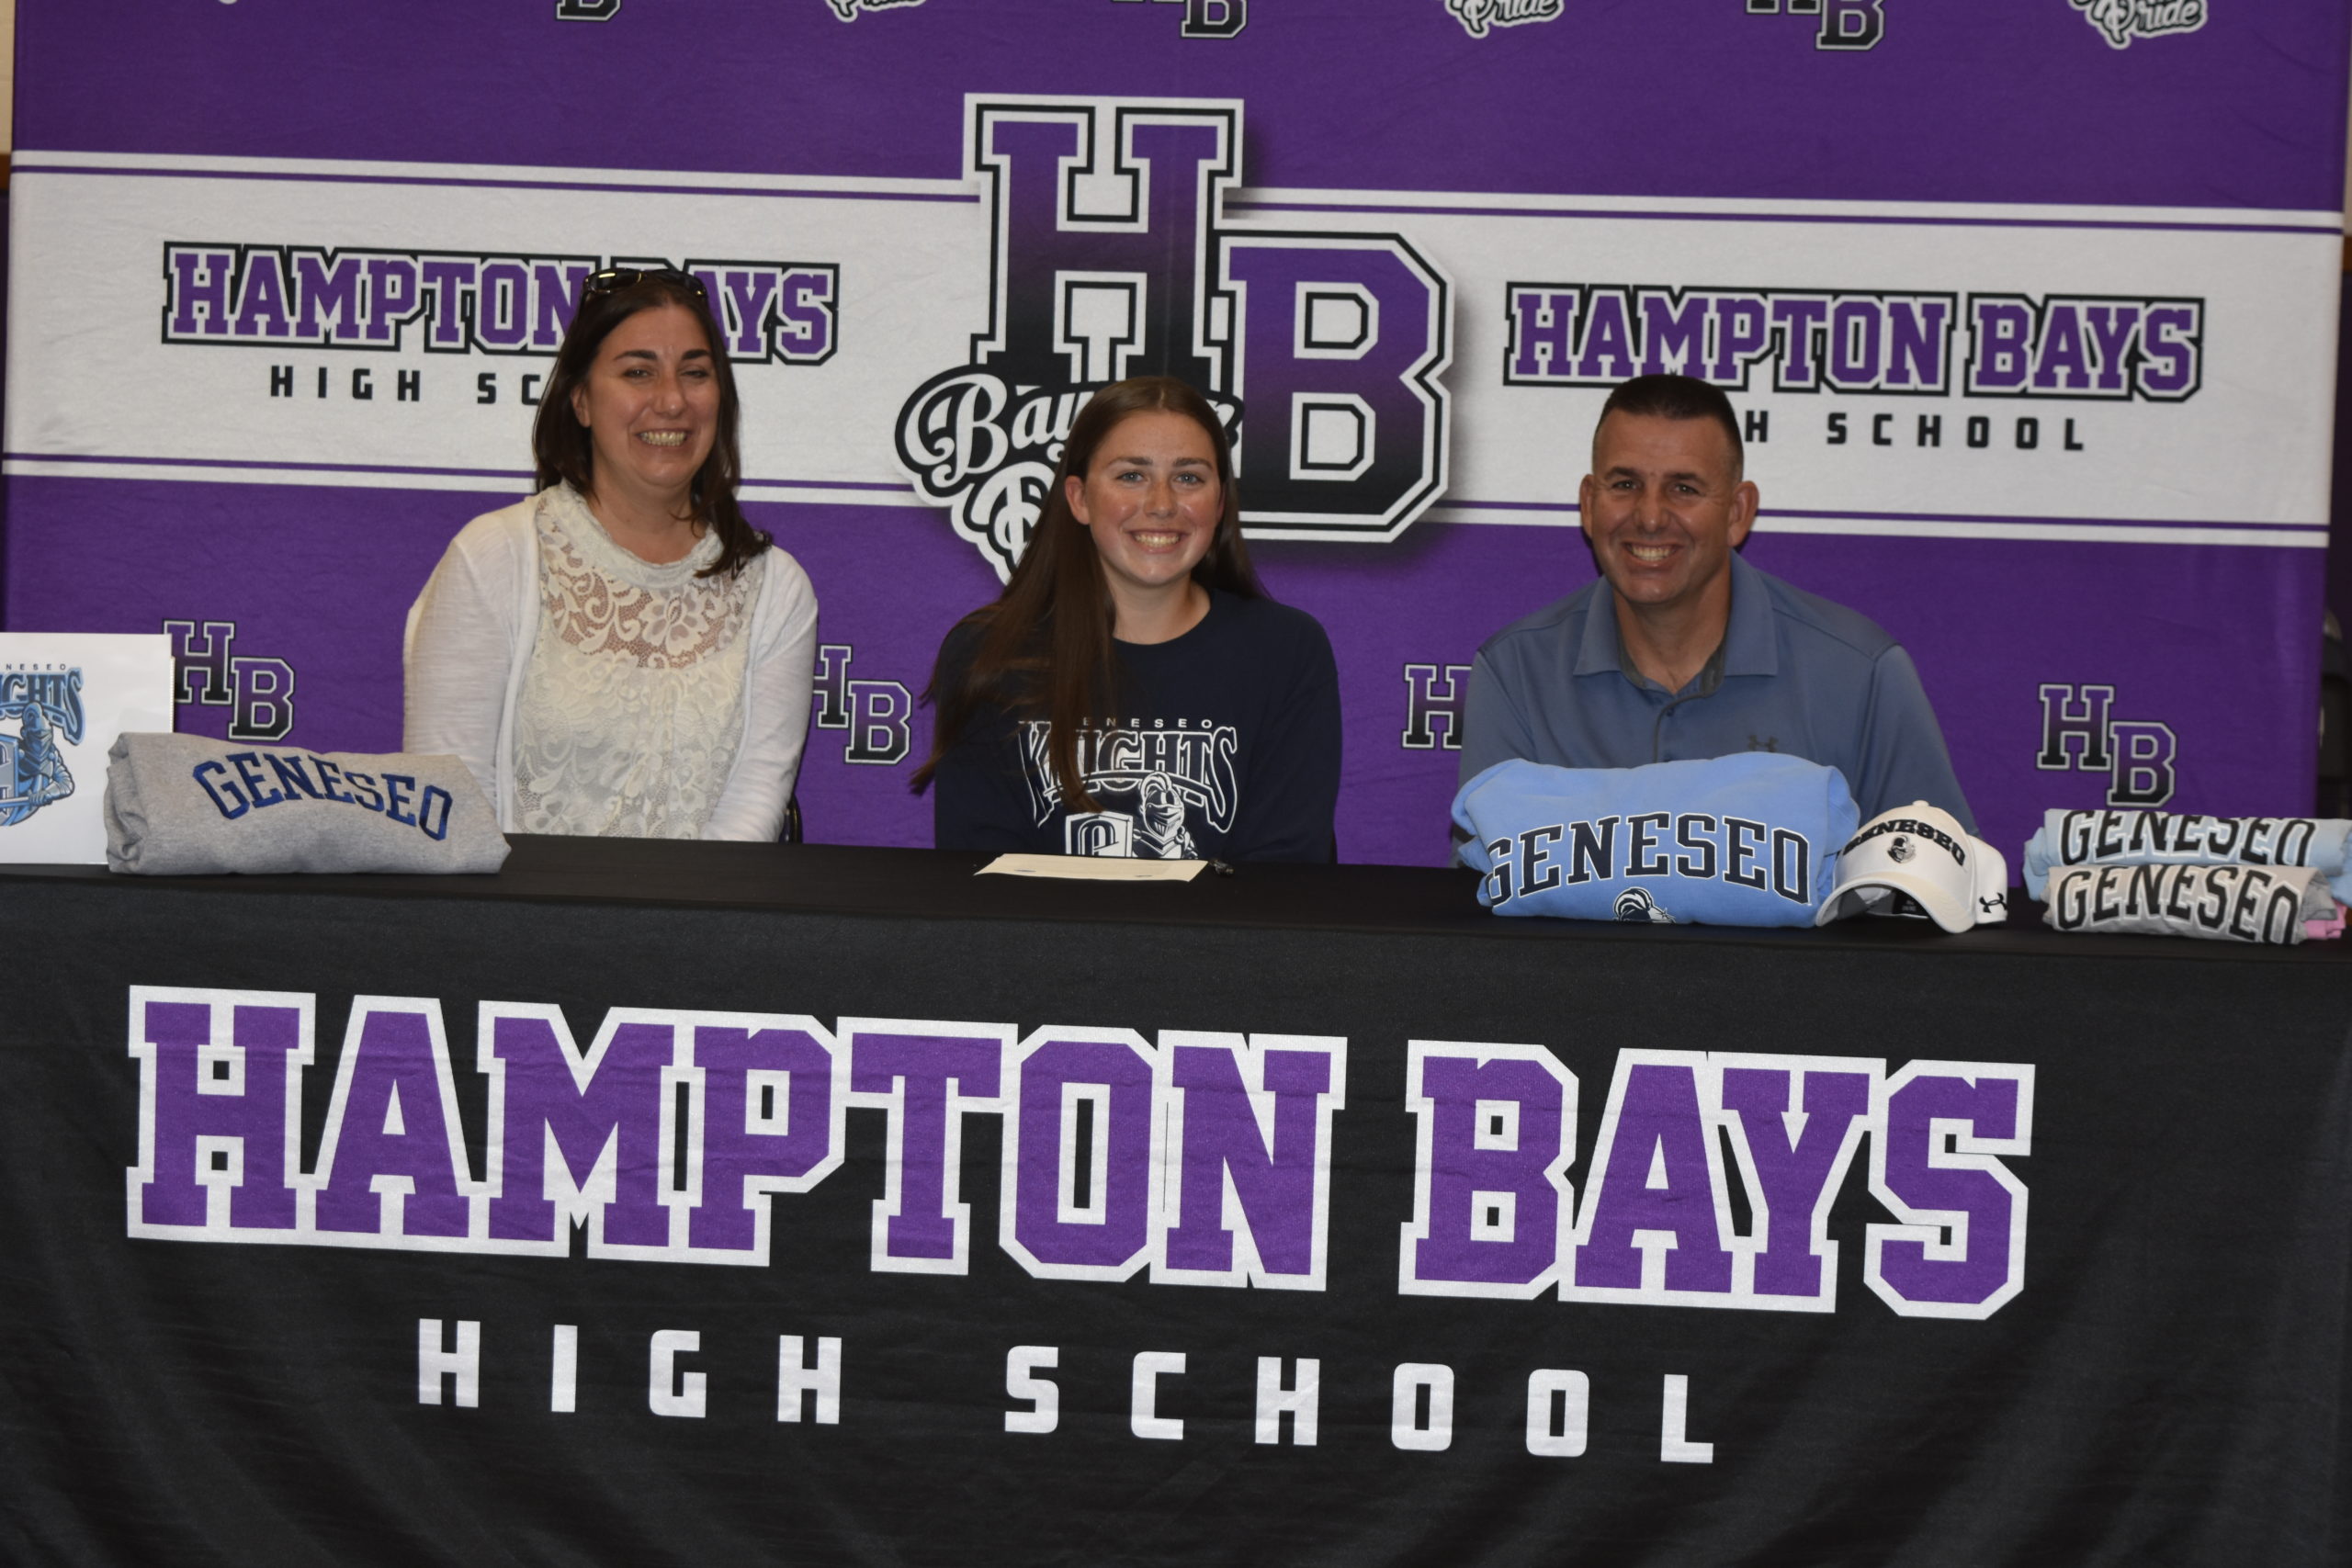 Tara Brochu with her parents, Paul and Tara, signing her letter of intent to play softball at SUNY Geneseo on June 1.